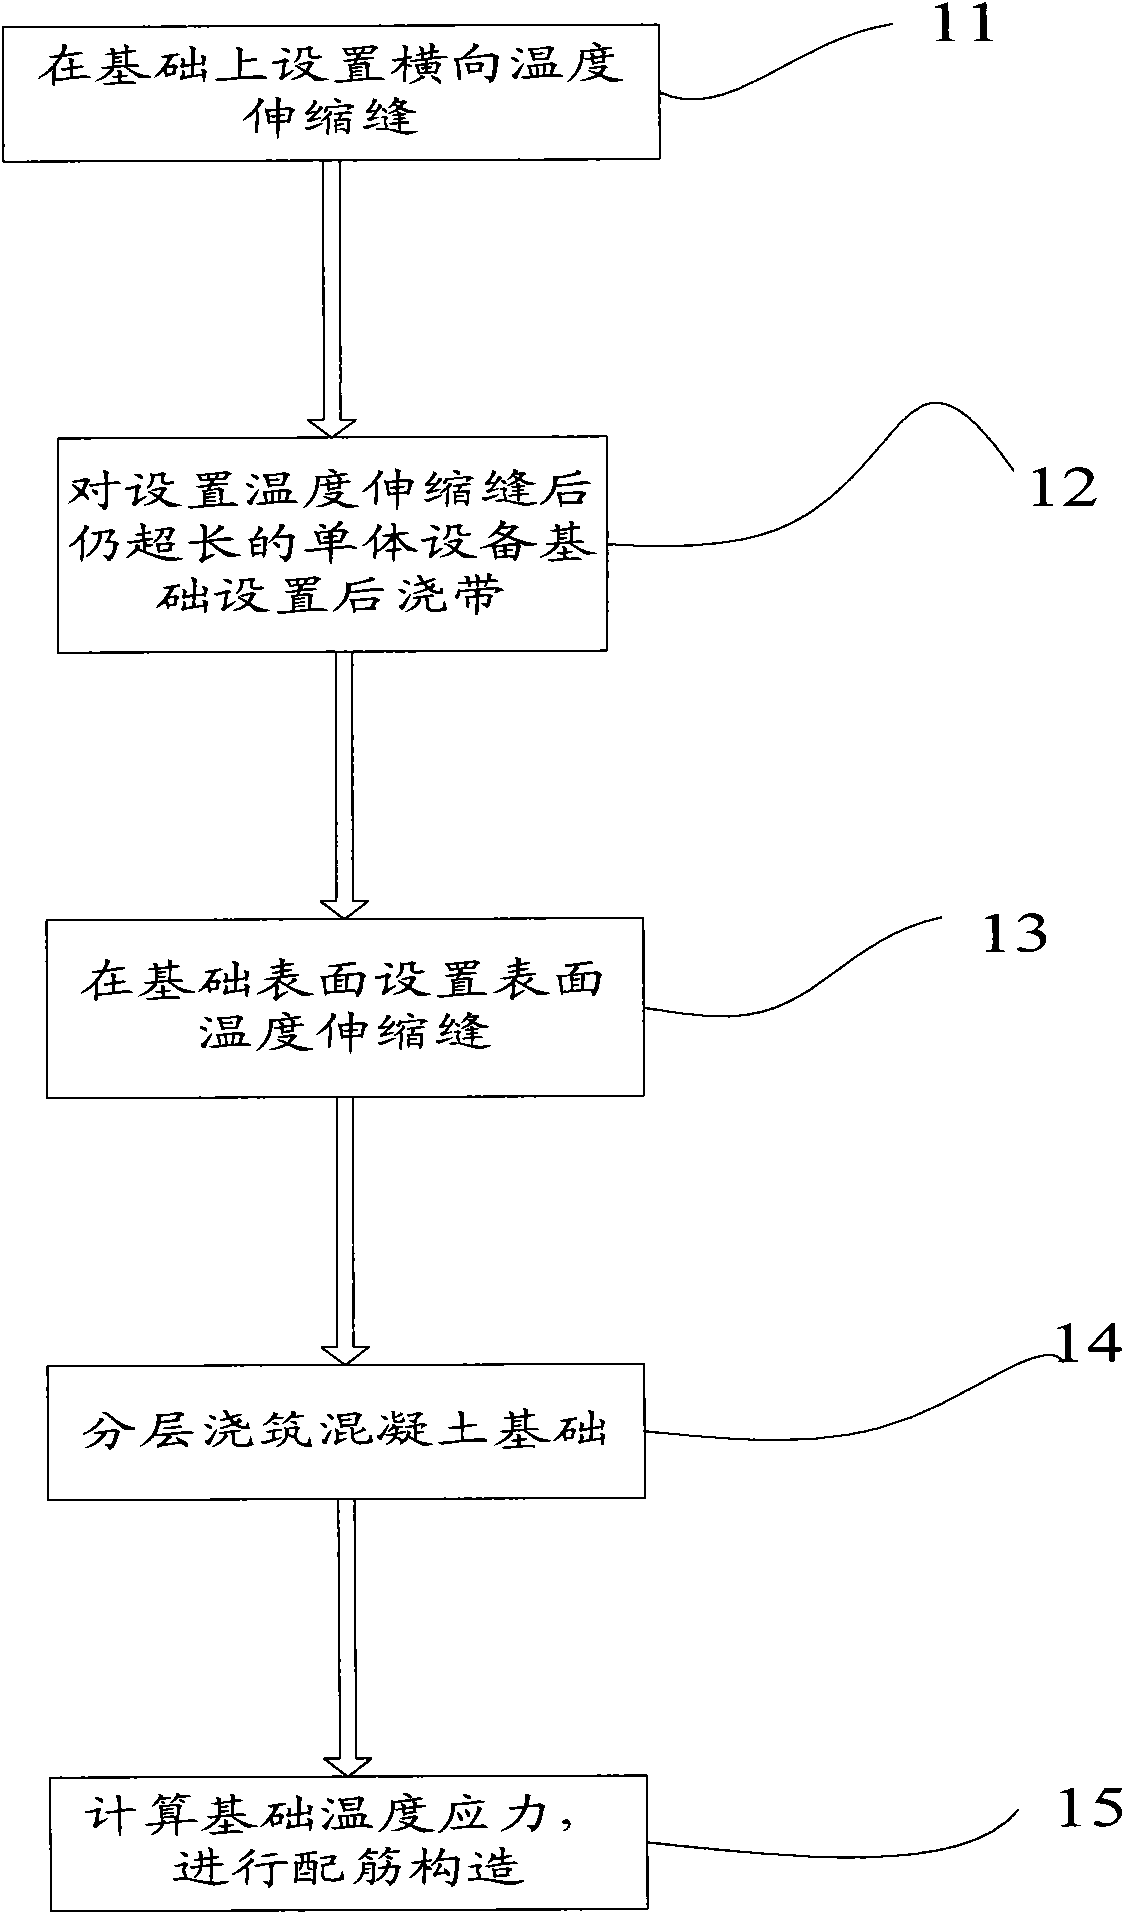 Method for controlling foundation crack of extra-high voltage combined electrical apparatus GIS equipment